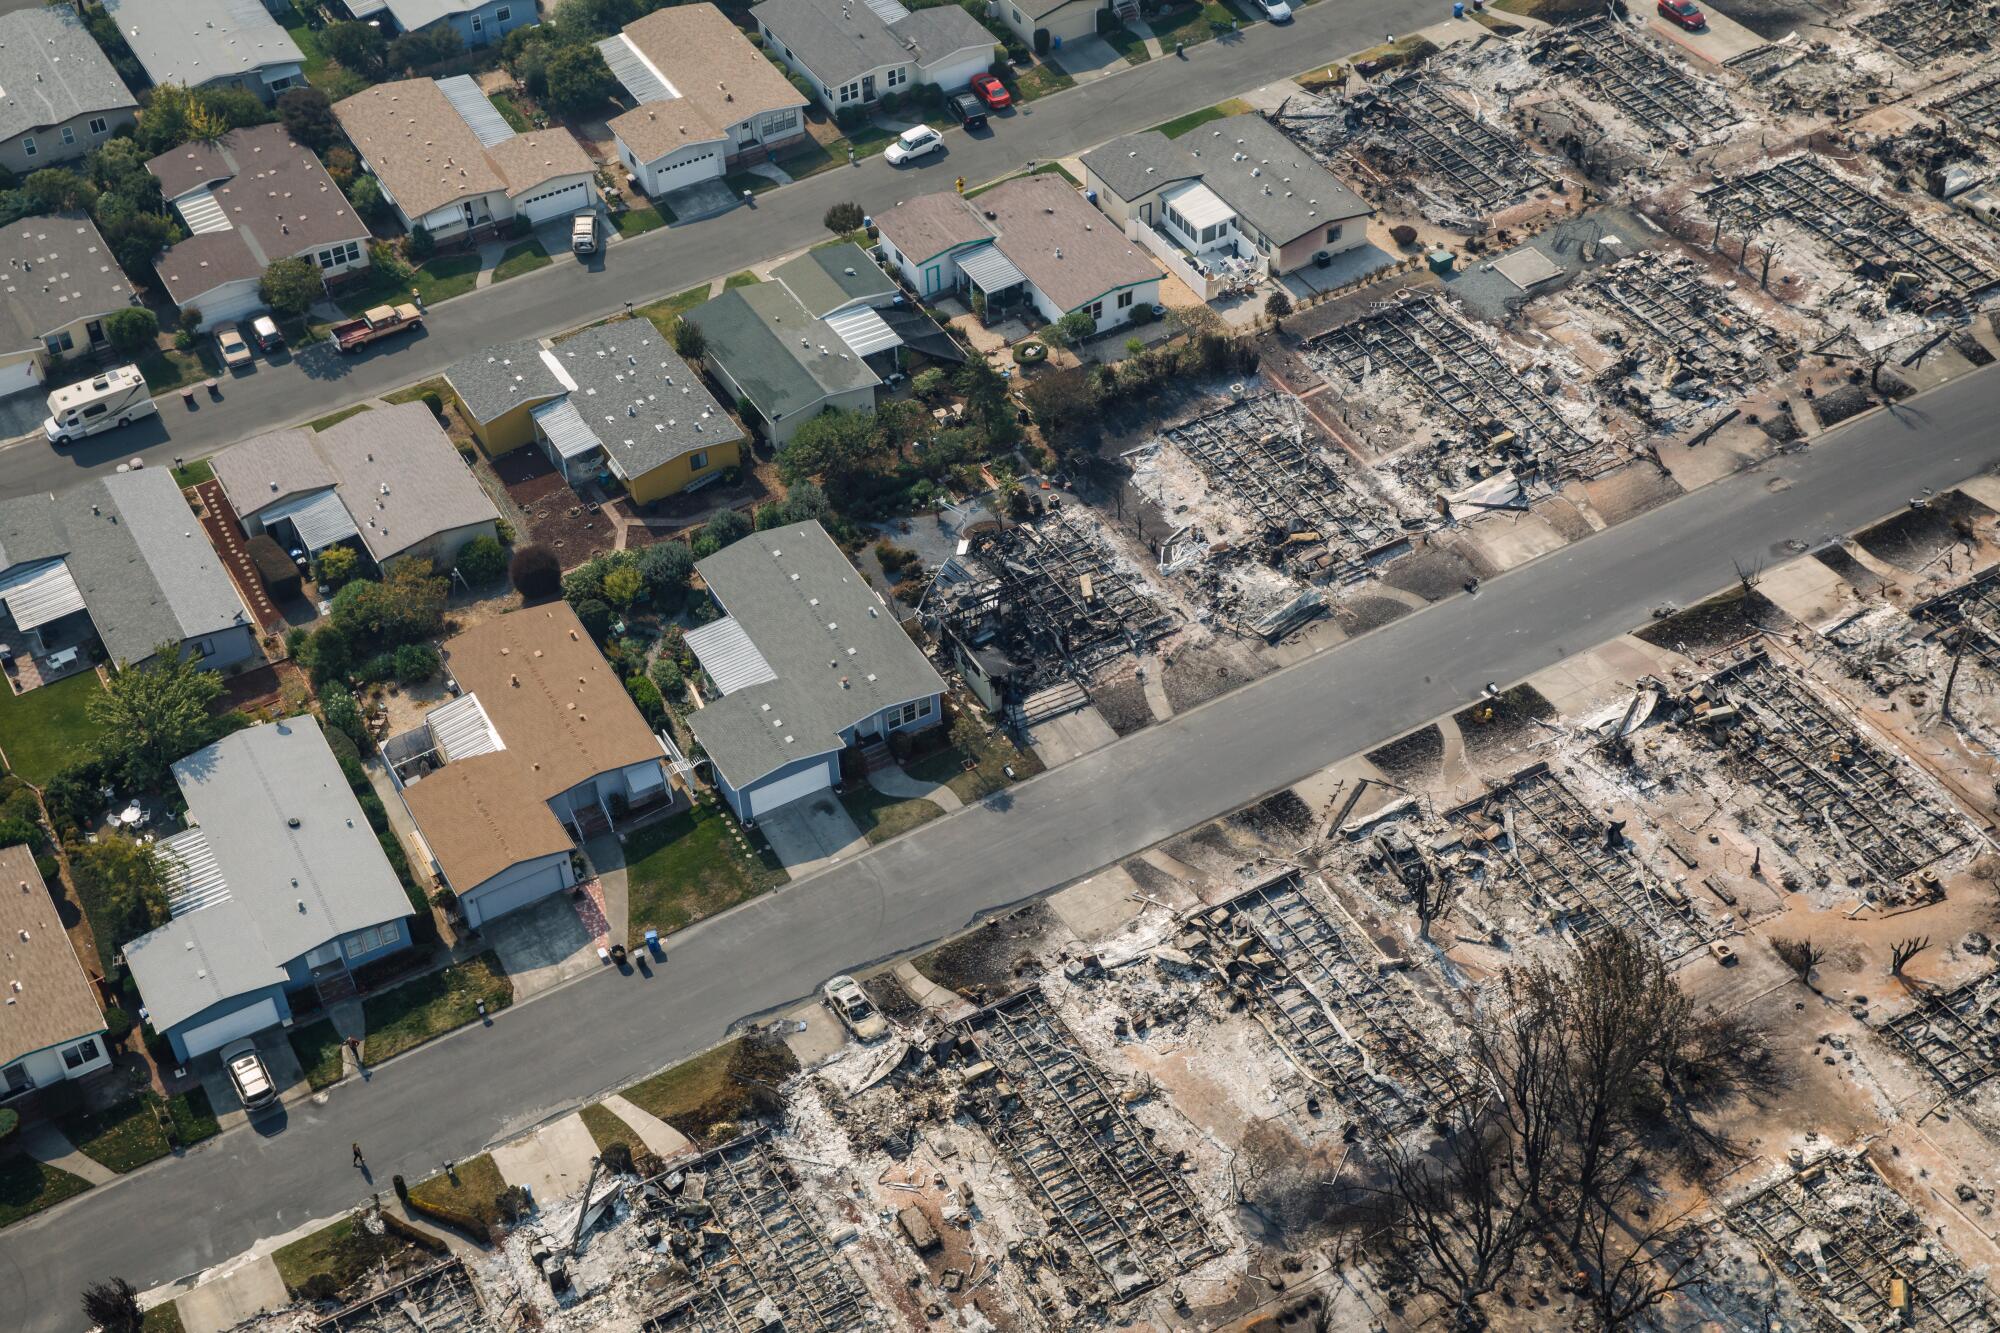 Some homes in Coffey Park were undamaged in the 2017 Tubbs fire, while others were destroyed.